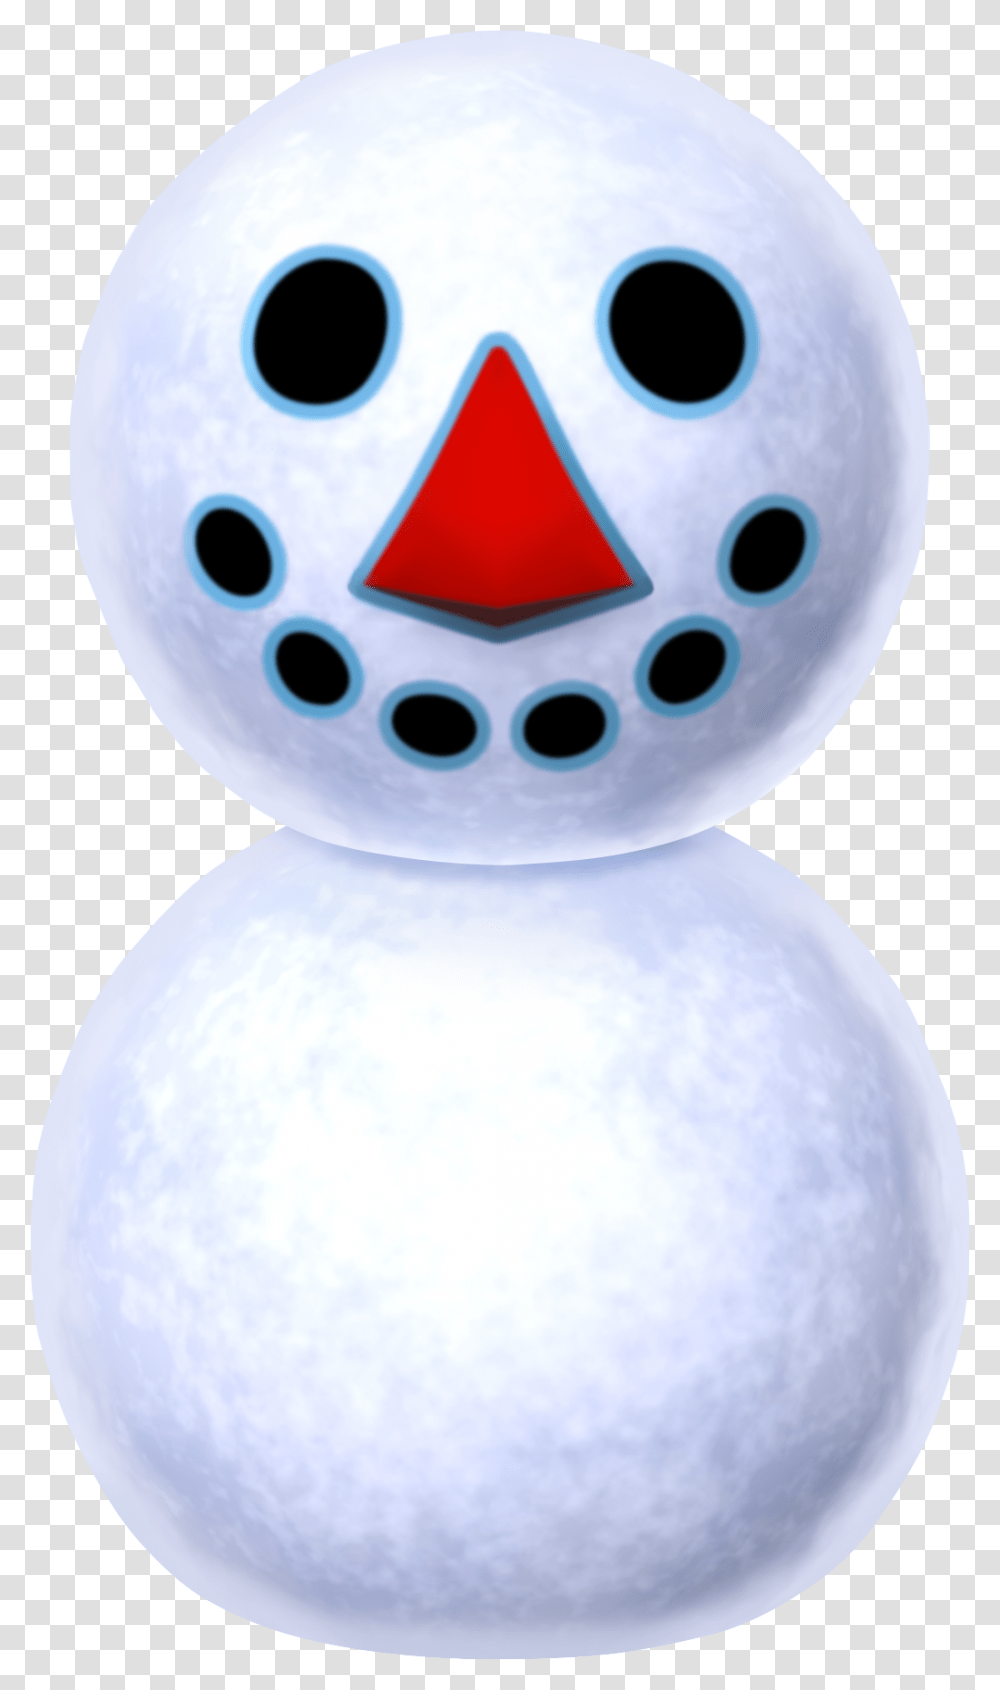 Snowman Animal Crossing New Leaf Snowman, Winter, Outdoors, Nature, Robot Transparent Png